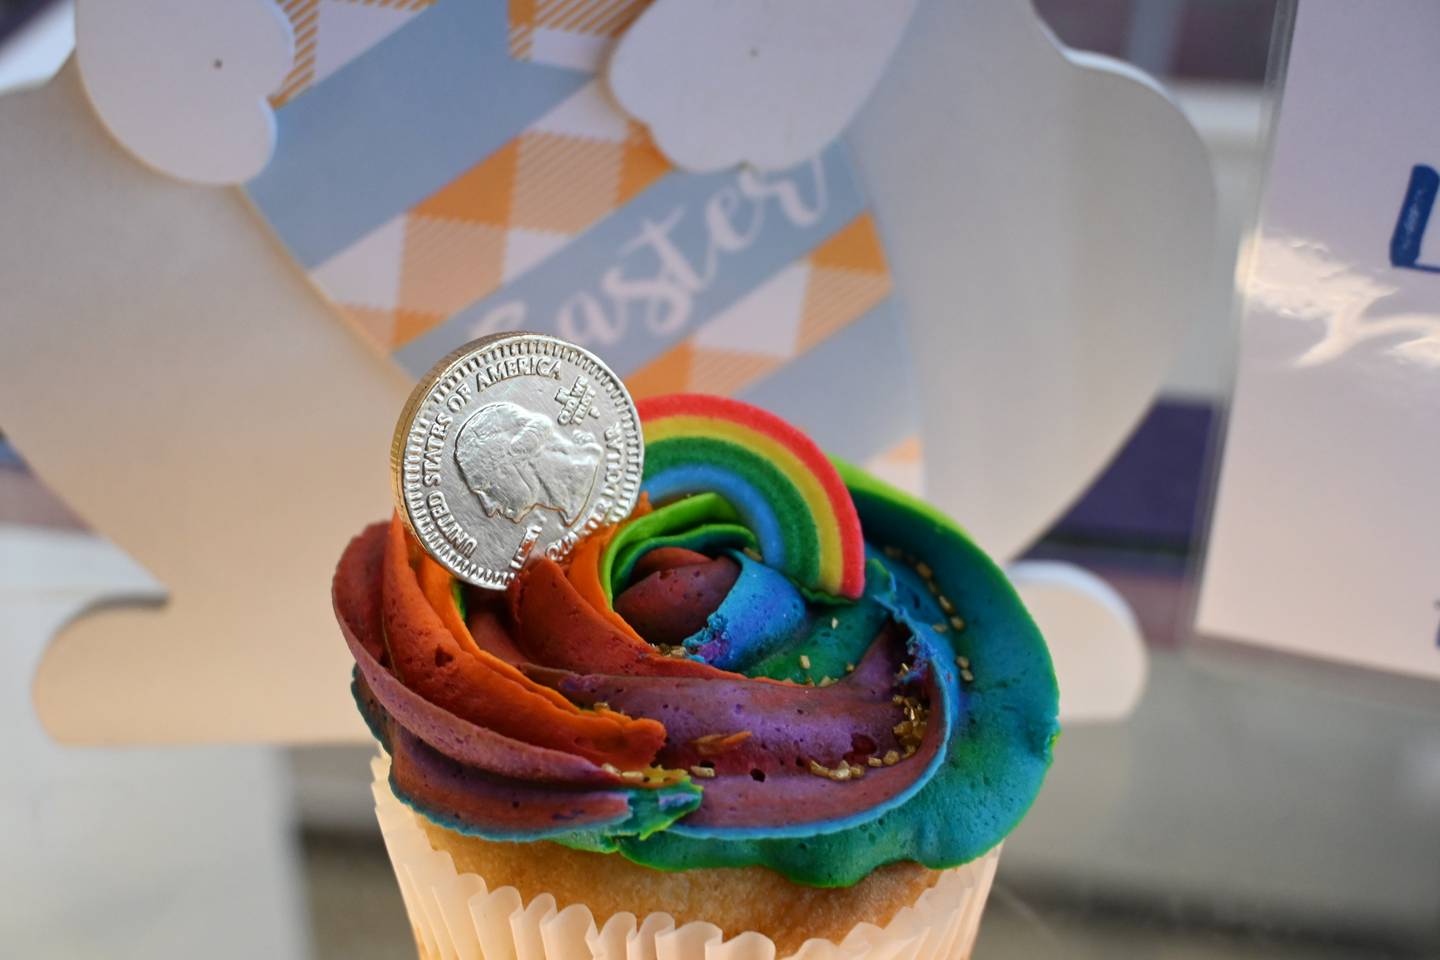 The Magical Rainbow cupcake. Made with chocolate or vanilla cake, frosted with colored vanilla buttercream and topped with a chocolate coin.